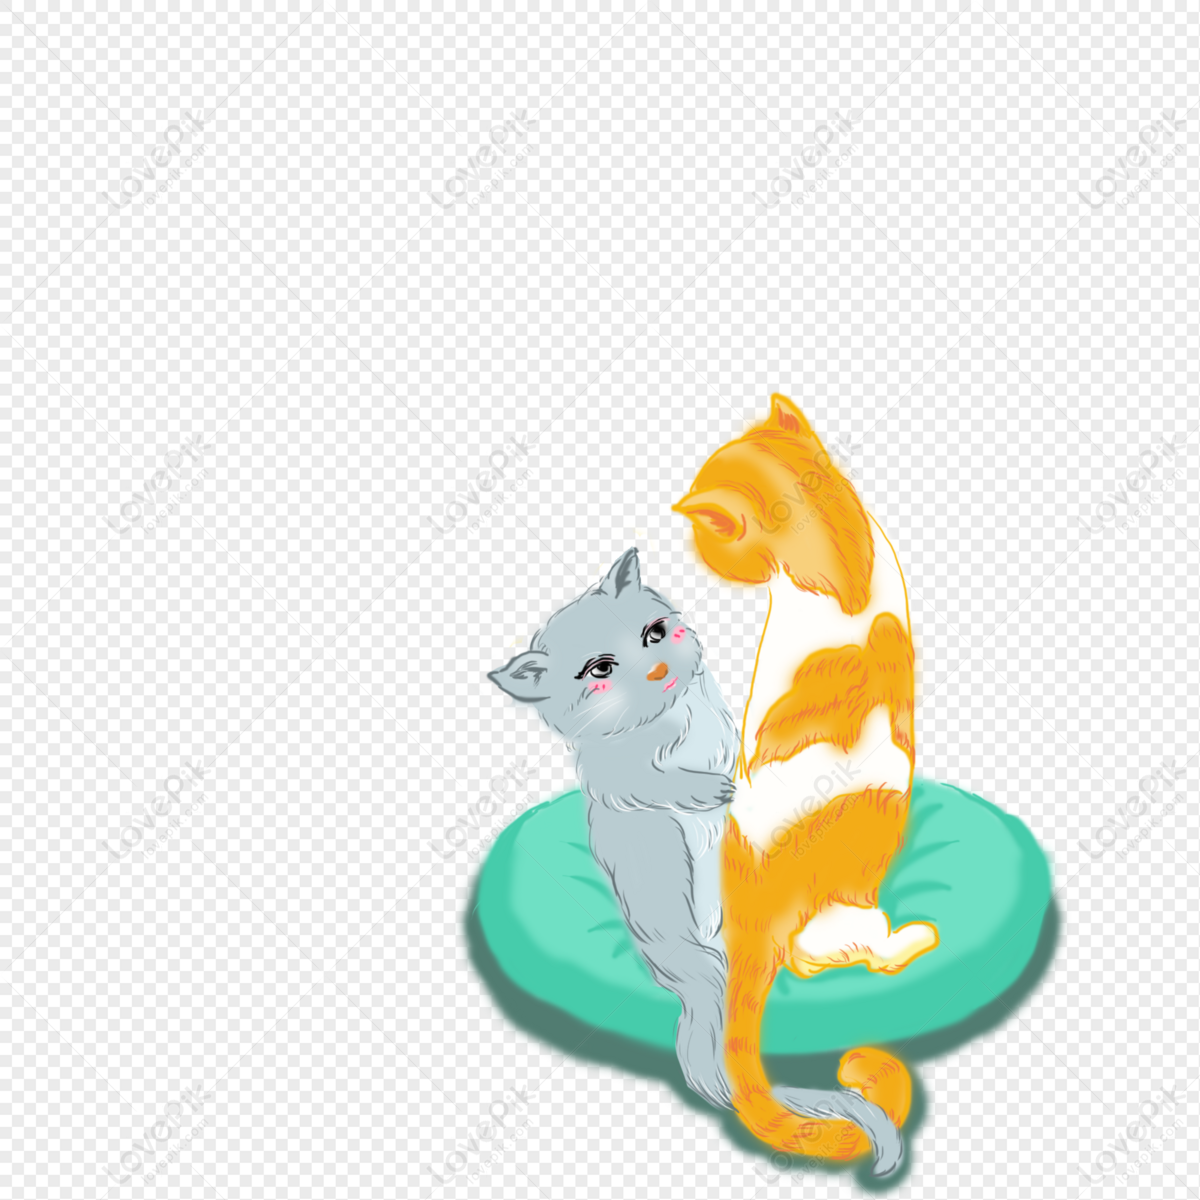 Two Cats PNG, Vector, PSD, and Clipart With Transparent Background